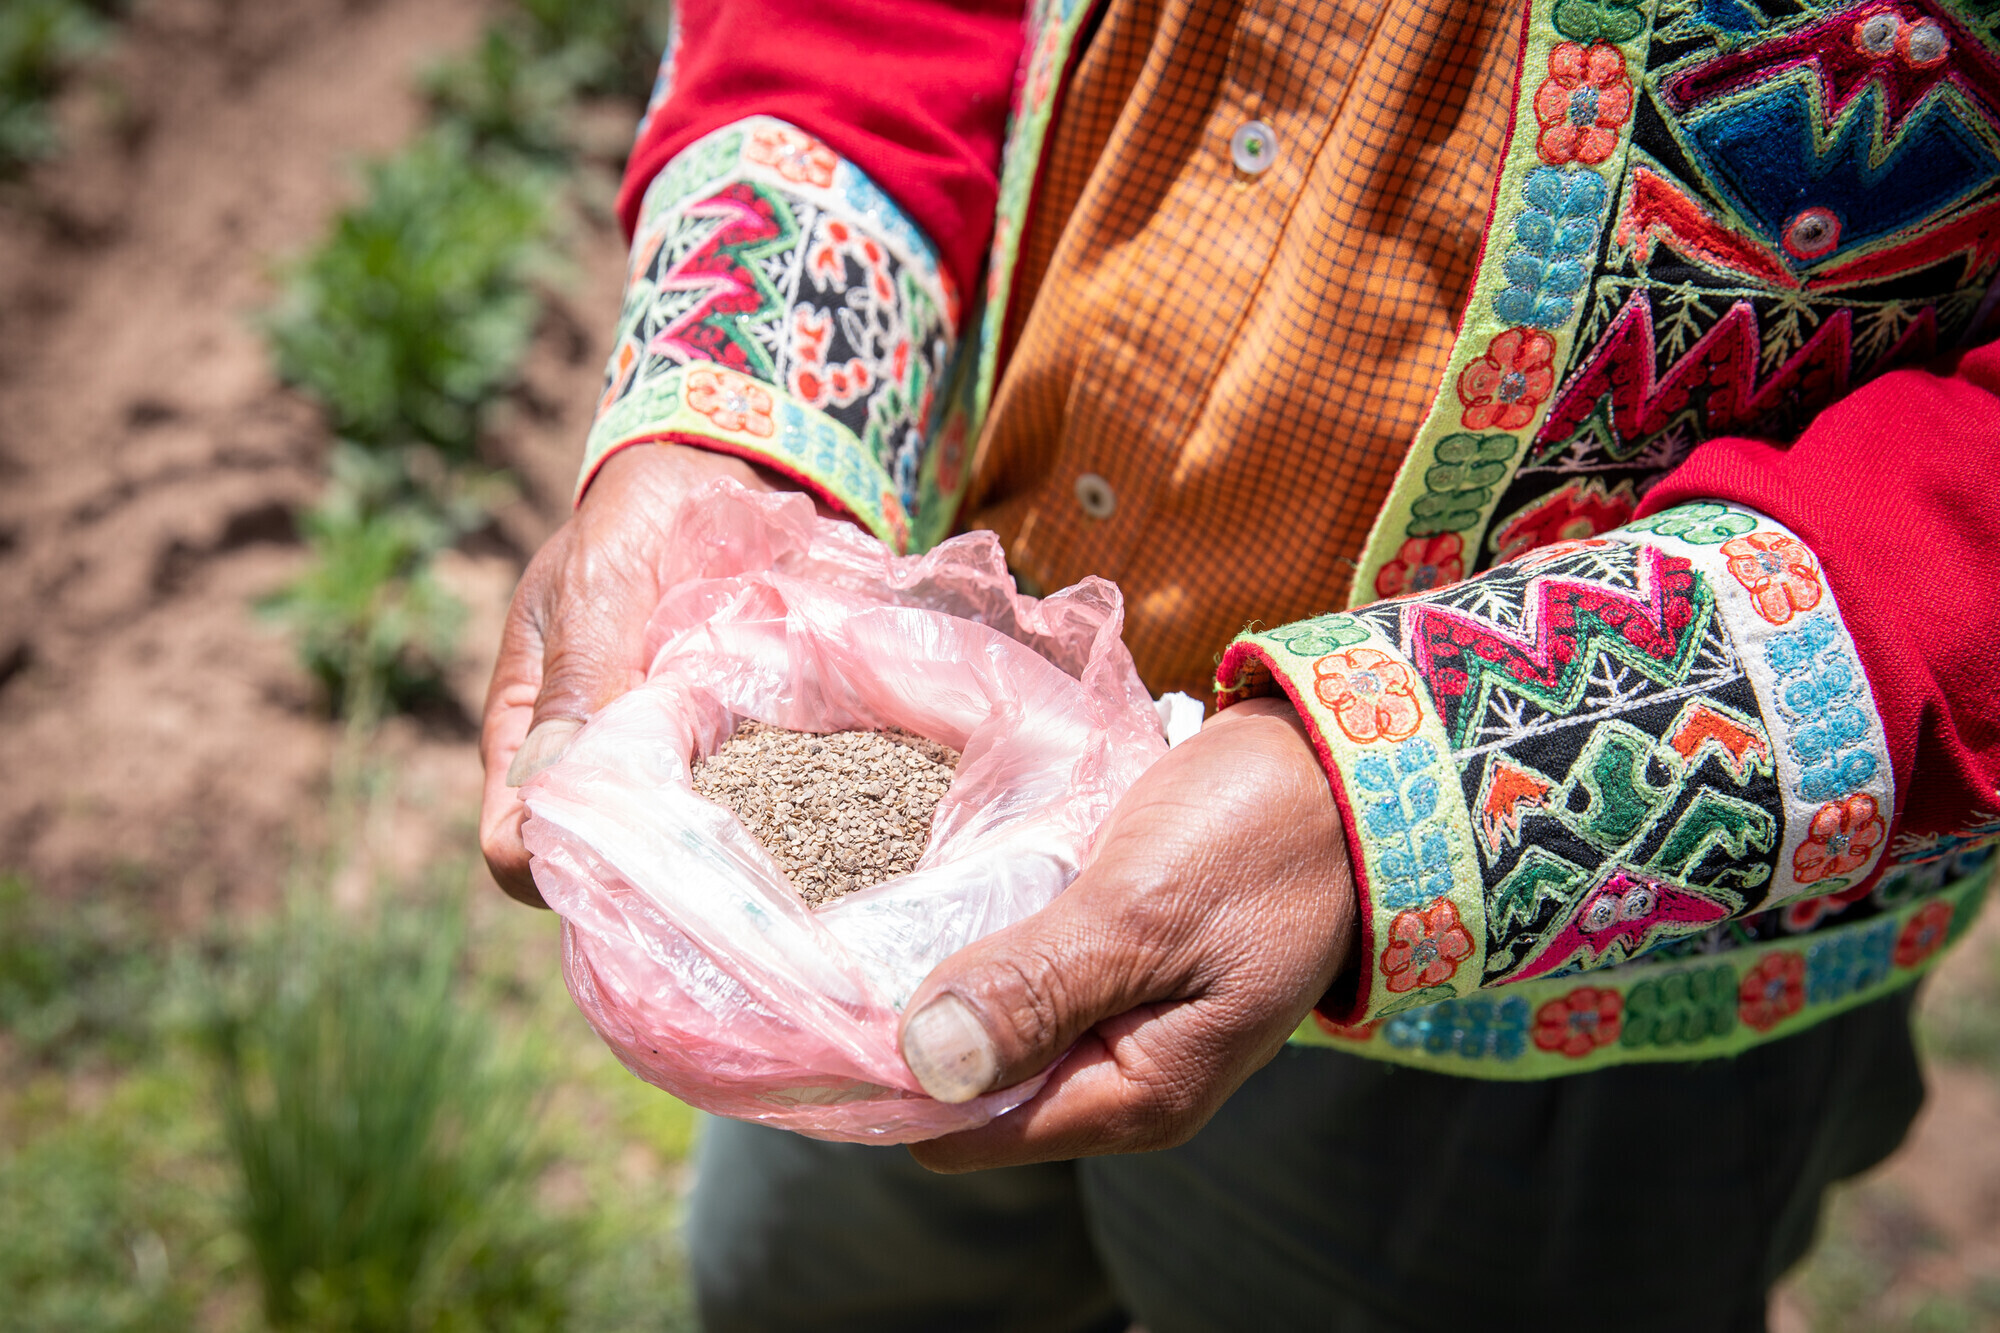 A person in a colorful red jacket holds a bag of potato seeds